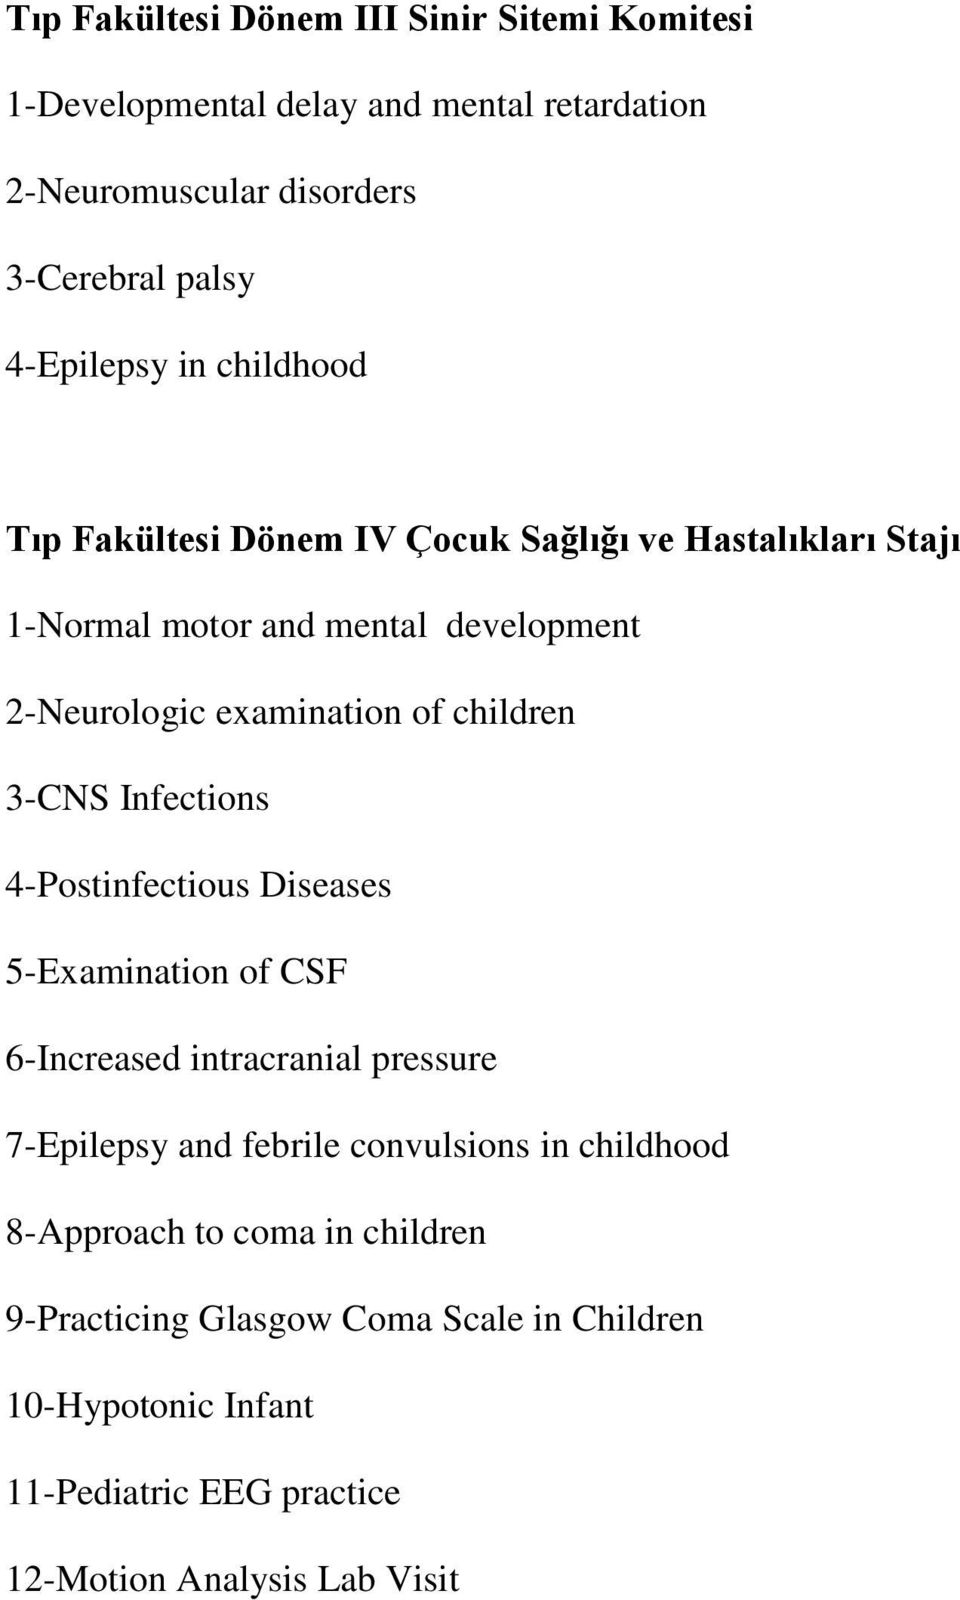 3-CNS Infections 4-Postinfectious Diseases 5-Examination of CSF 6-Increased intracranial pressure 7-Epilepsy and febrile convulsions in childhood